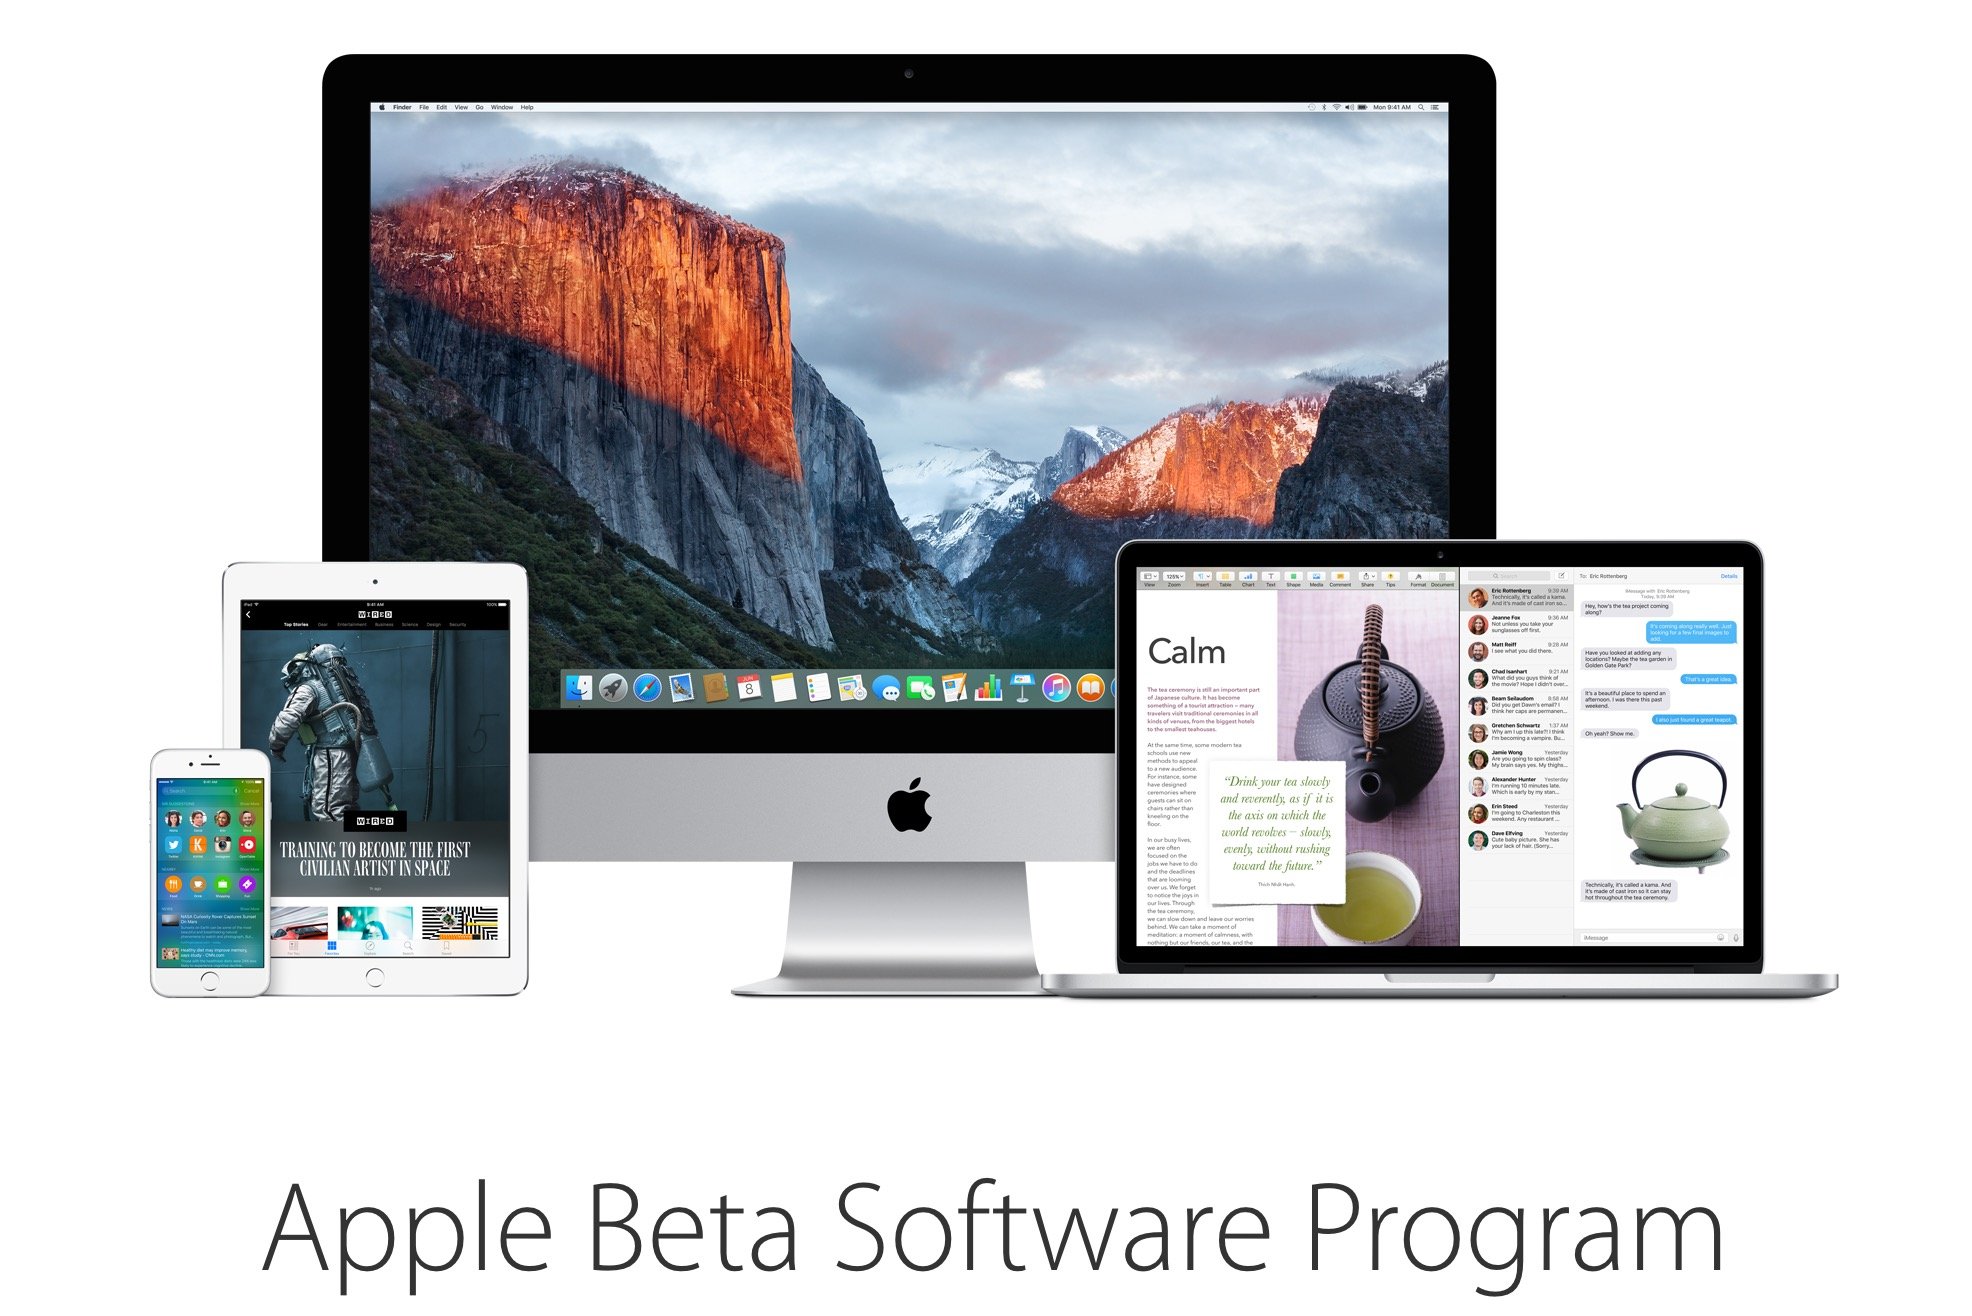 Sign up for the OS X El Capitan beta now.